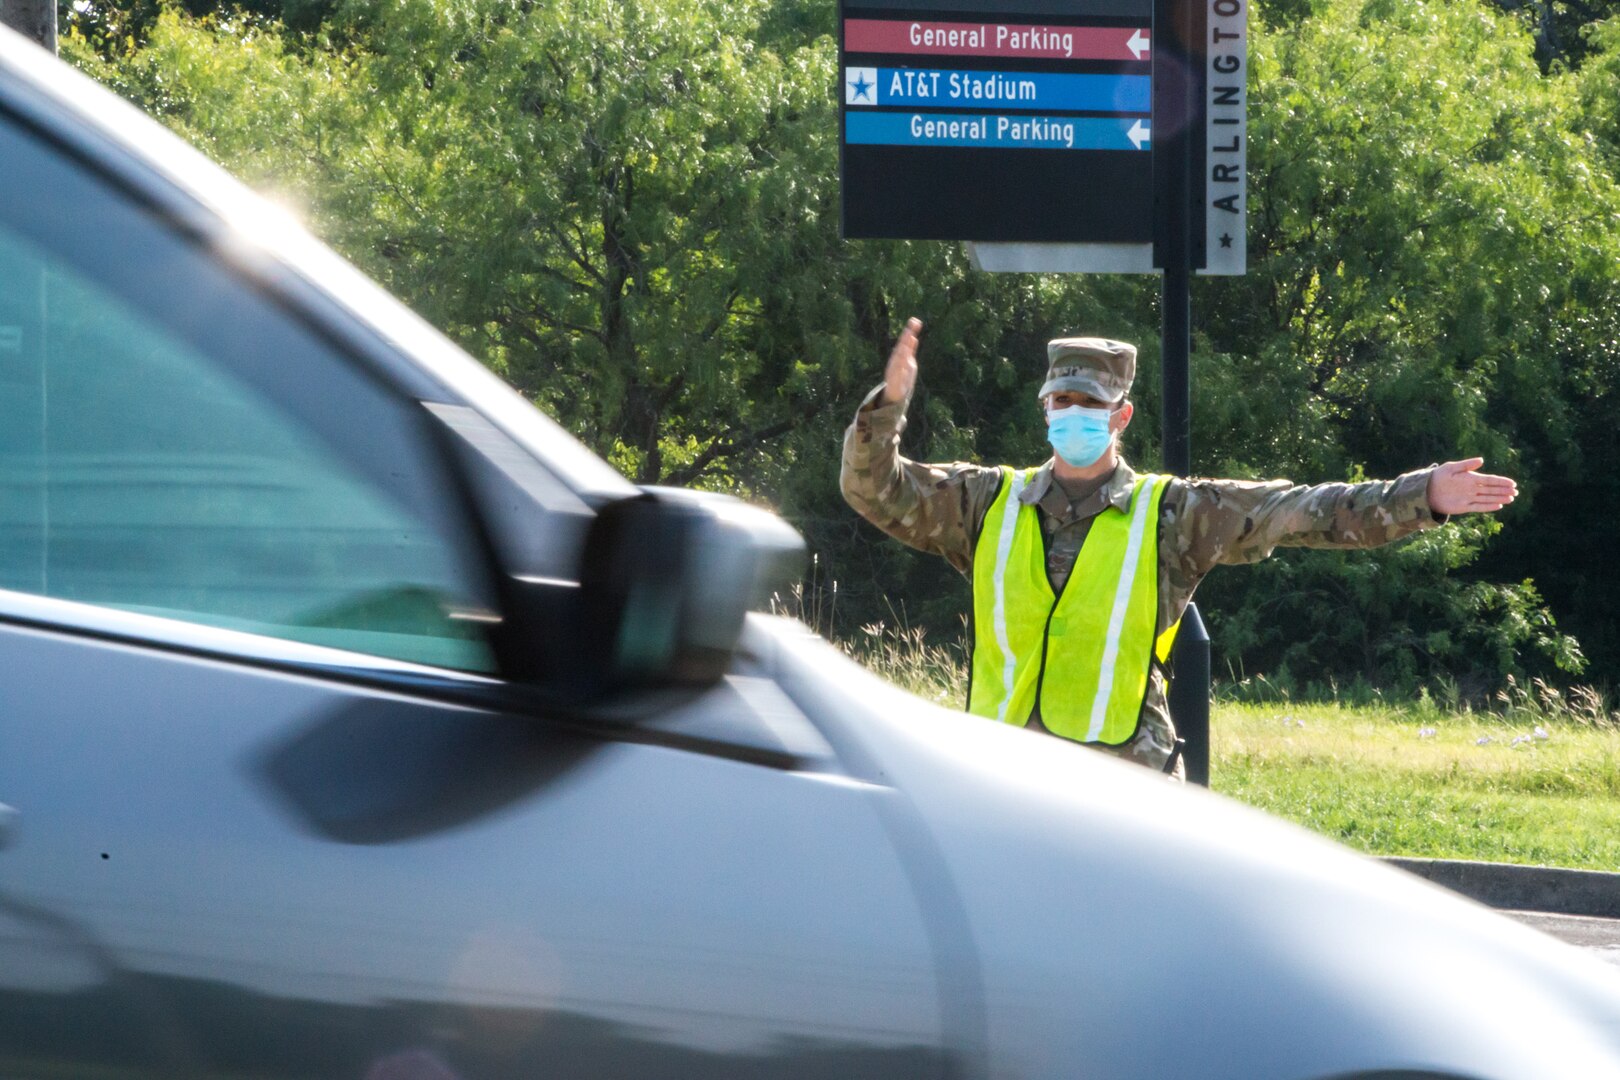 Texas Air National Guard Tech. Sgt. Brenna Jackson directs exiting traffic during a food distribution event on July 8, 2020, in Arlington, Texas.